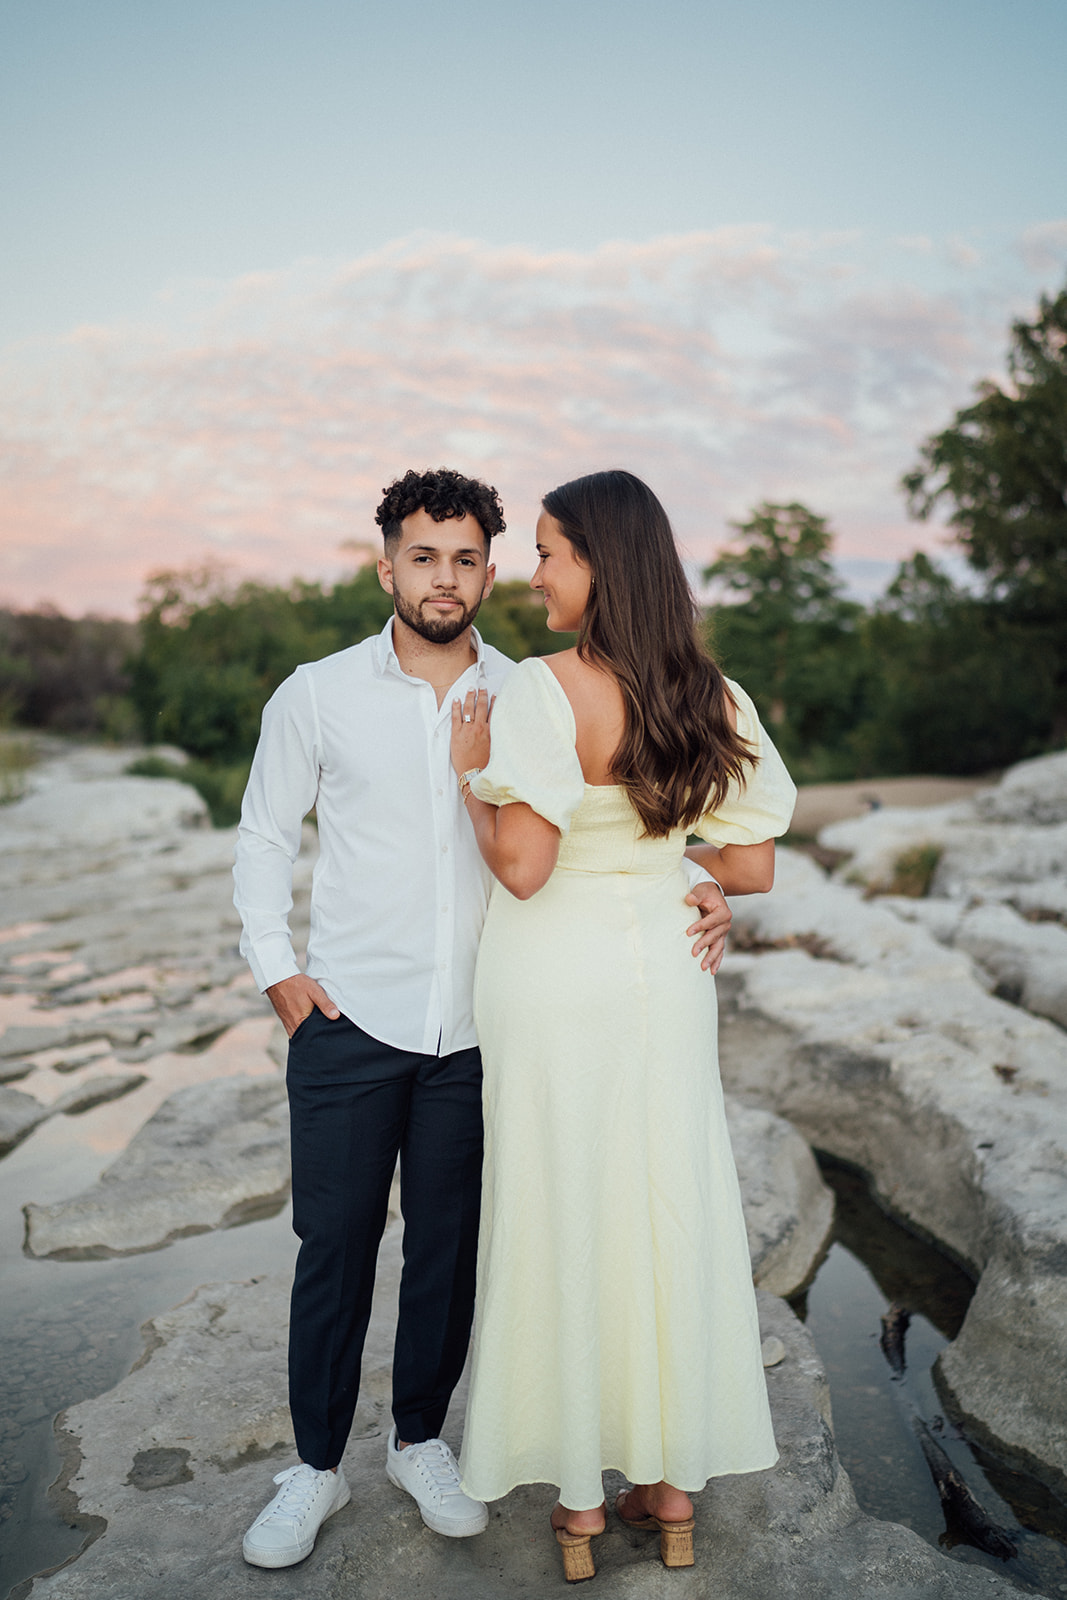 The sunsetting while a couple are taking engagement photos at McKinney Falls